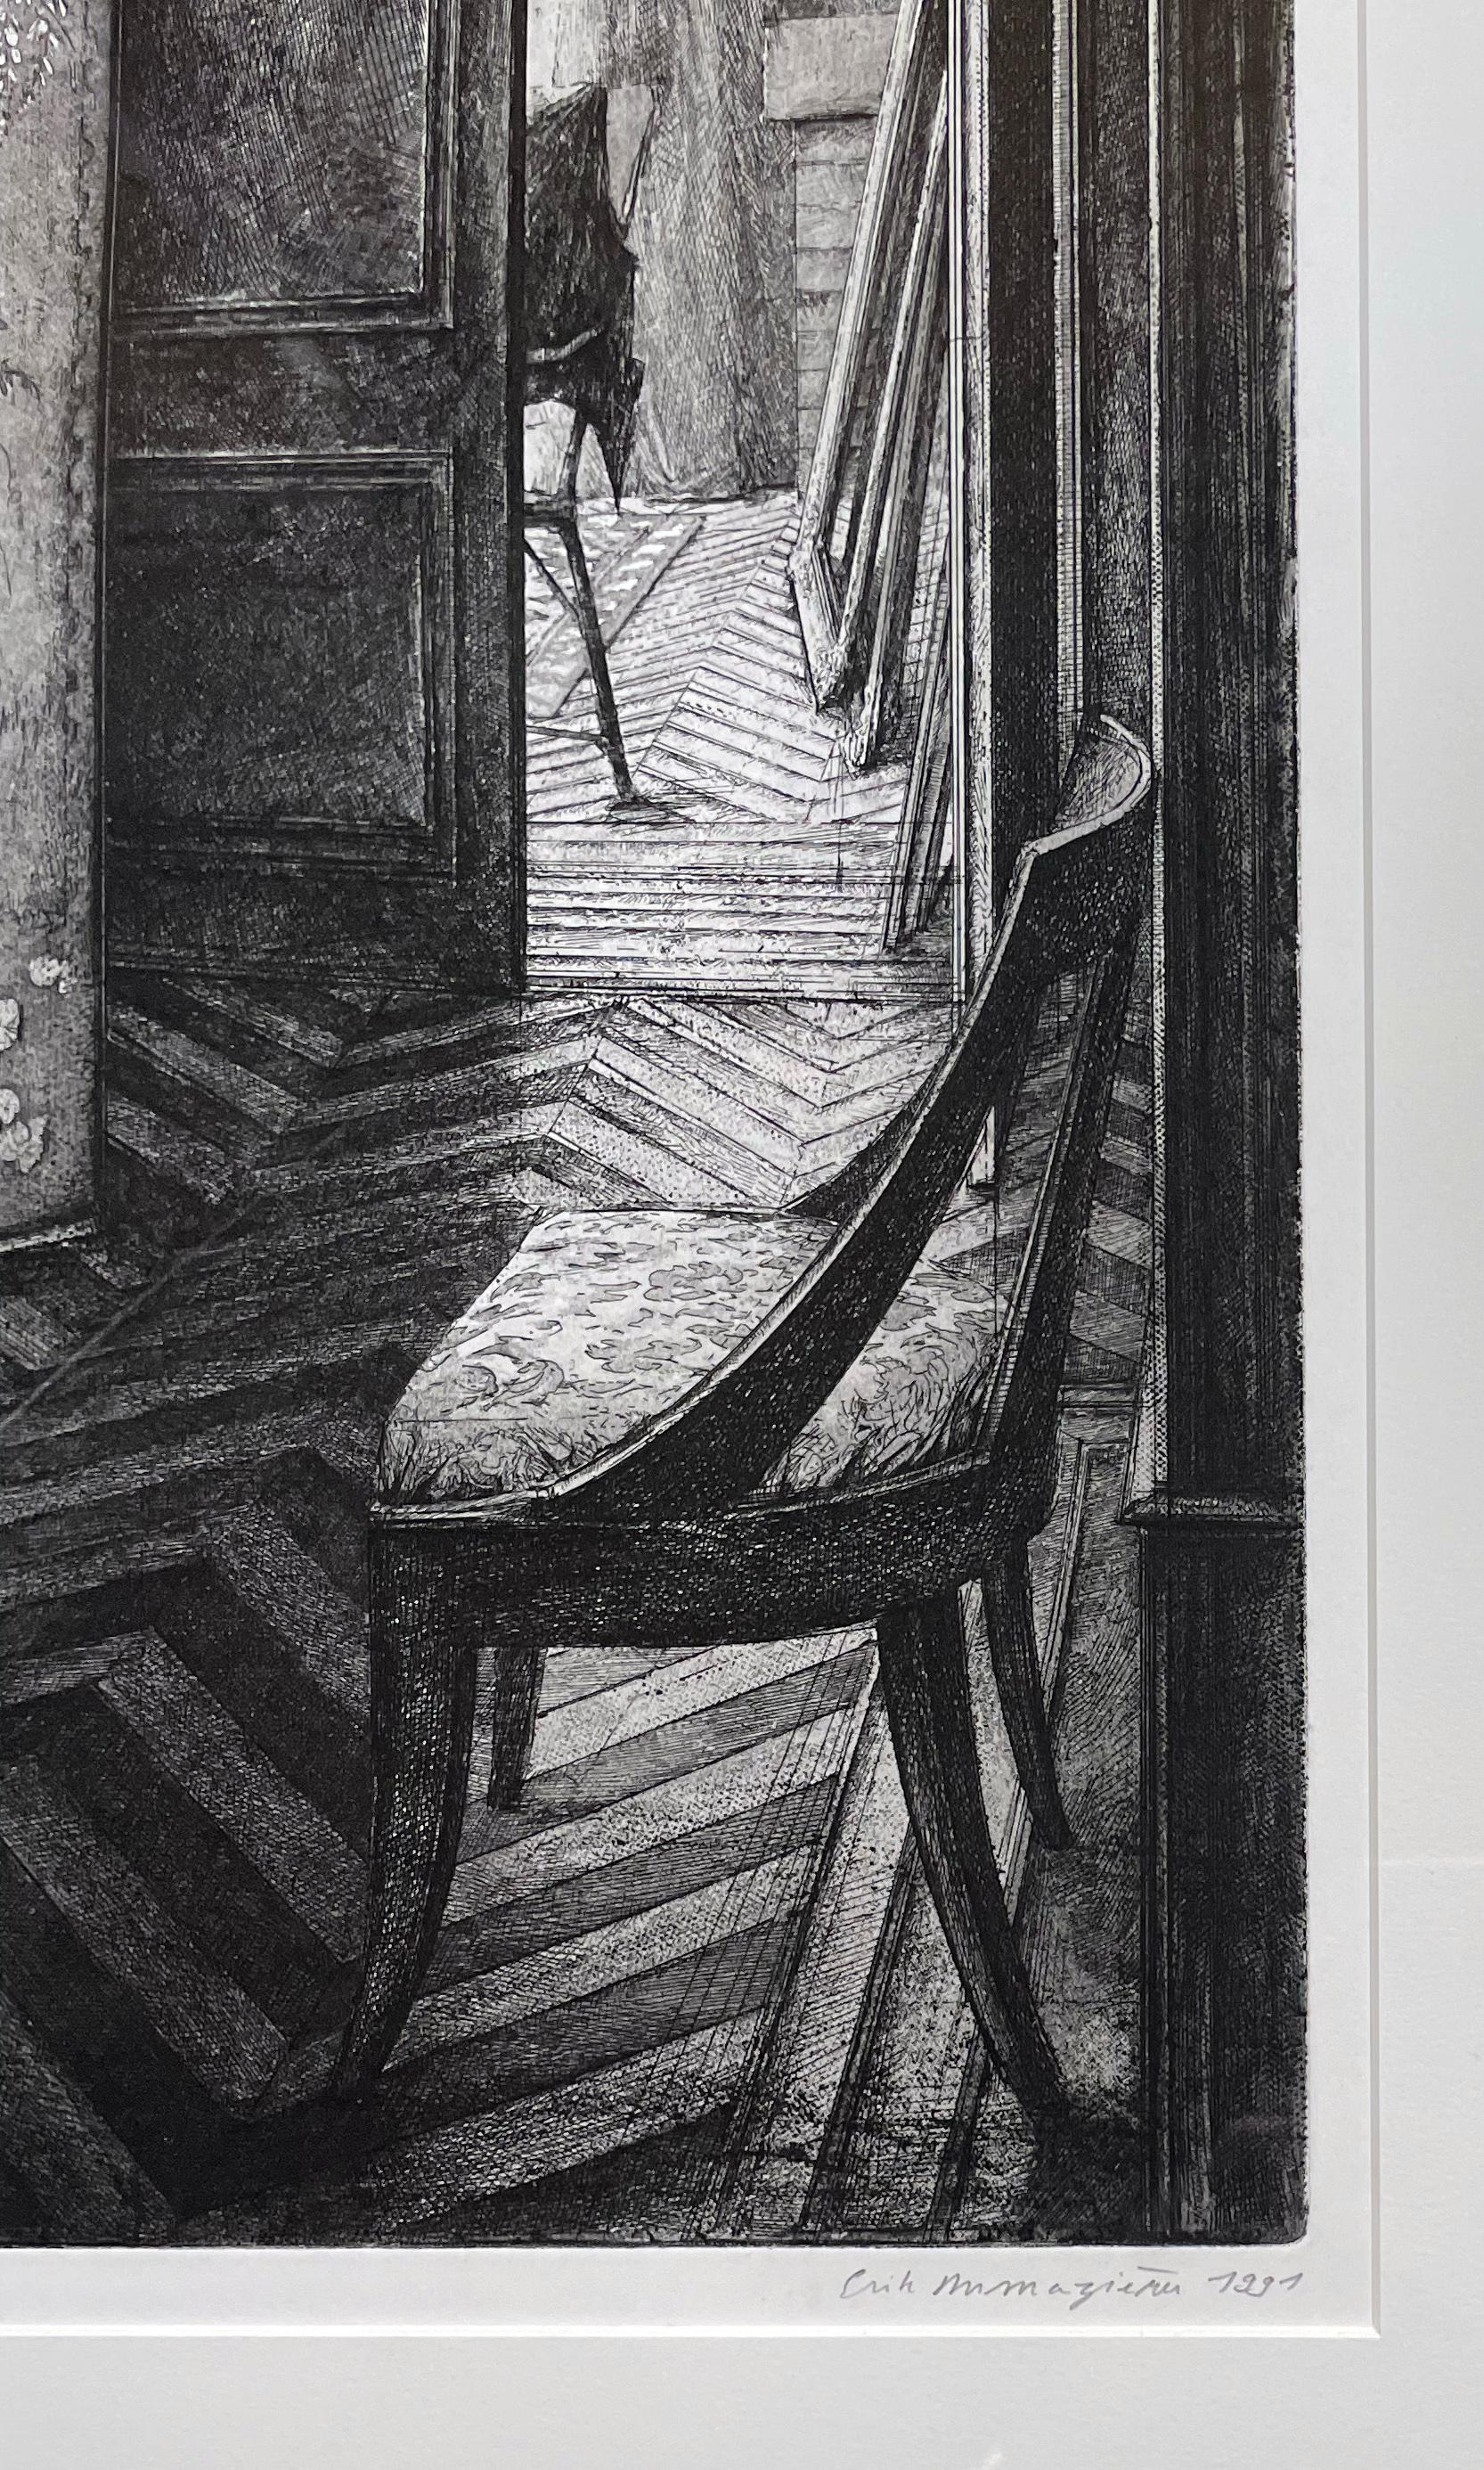 

Medium: Etching, aquatint & roulette
Year: 1991
Image Size: 24.63 X 39.63 inches
Edition Size: 90
Signed and numbered in pencil by the artist

Image of a Paris apartment, showing the artists' mastering of perspective and detail.

Erik Desmazières